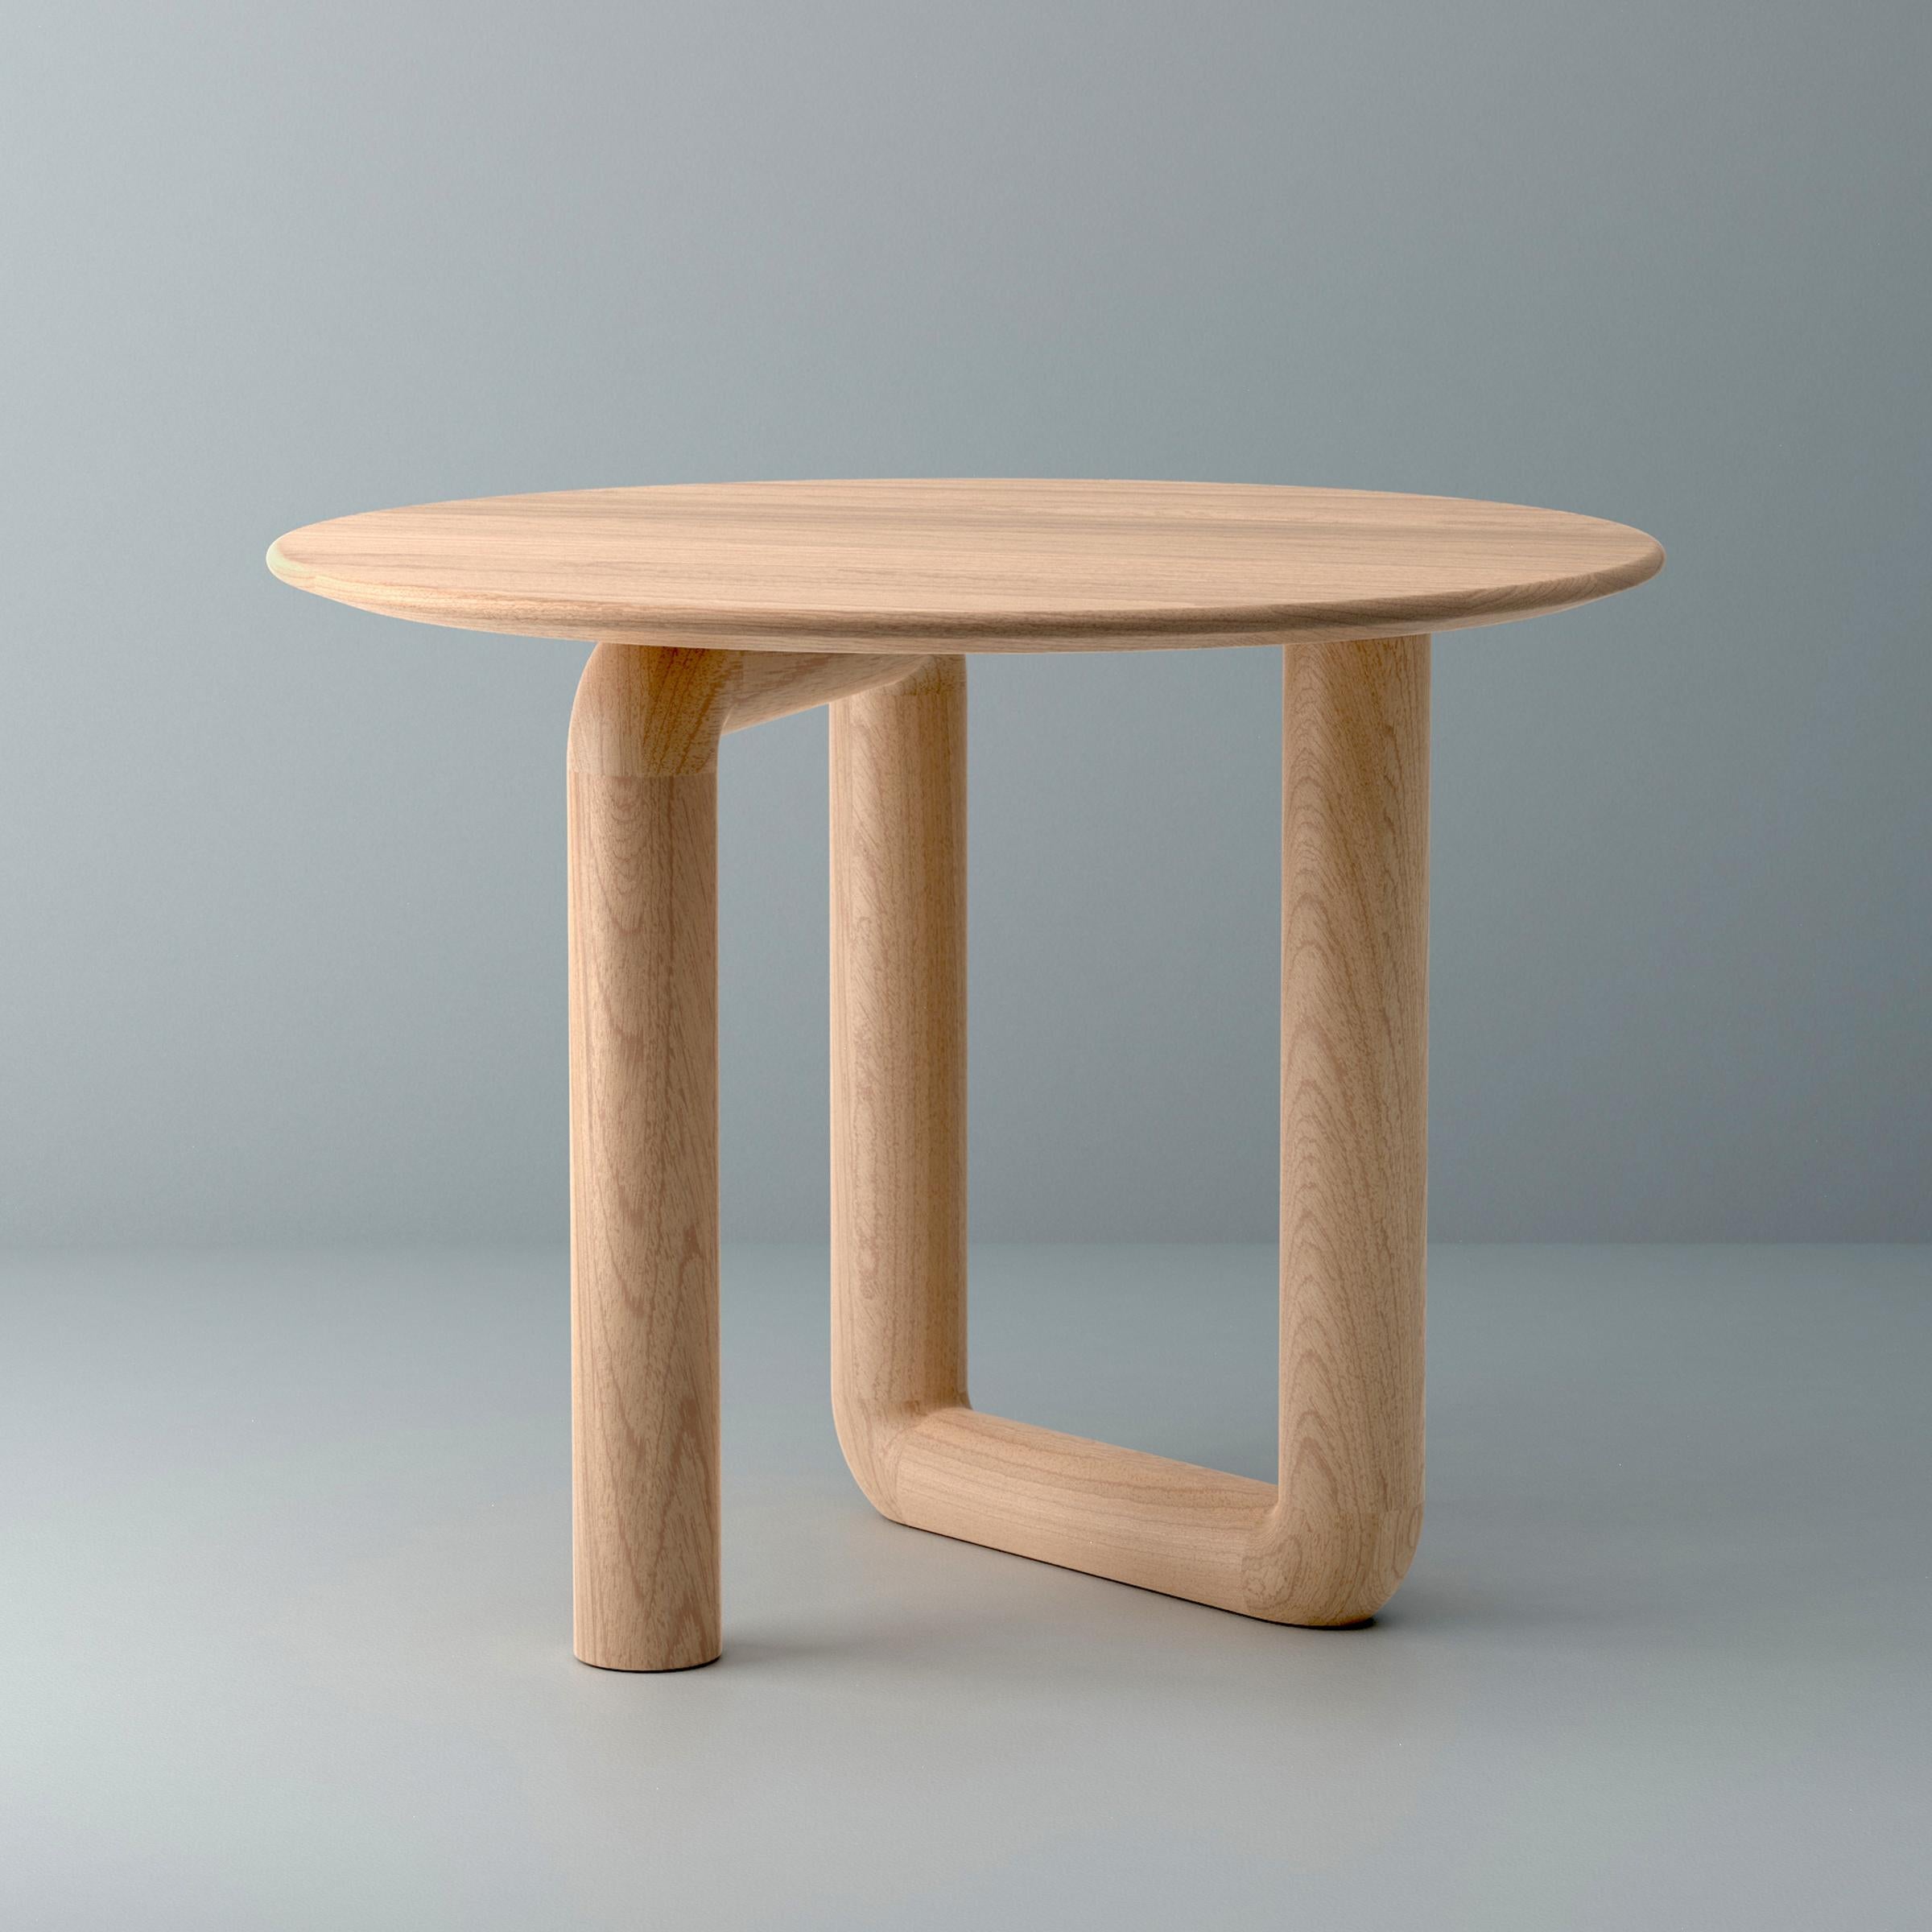 Part of the Mono family by Canadian studio Objects & Ideas, this table's top floats above a single twisting and turning outline of solid wood. Handcrafted from certified sustainable sources using traditional woodworking techniques to produce a